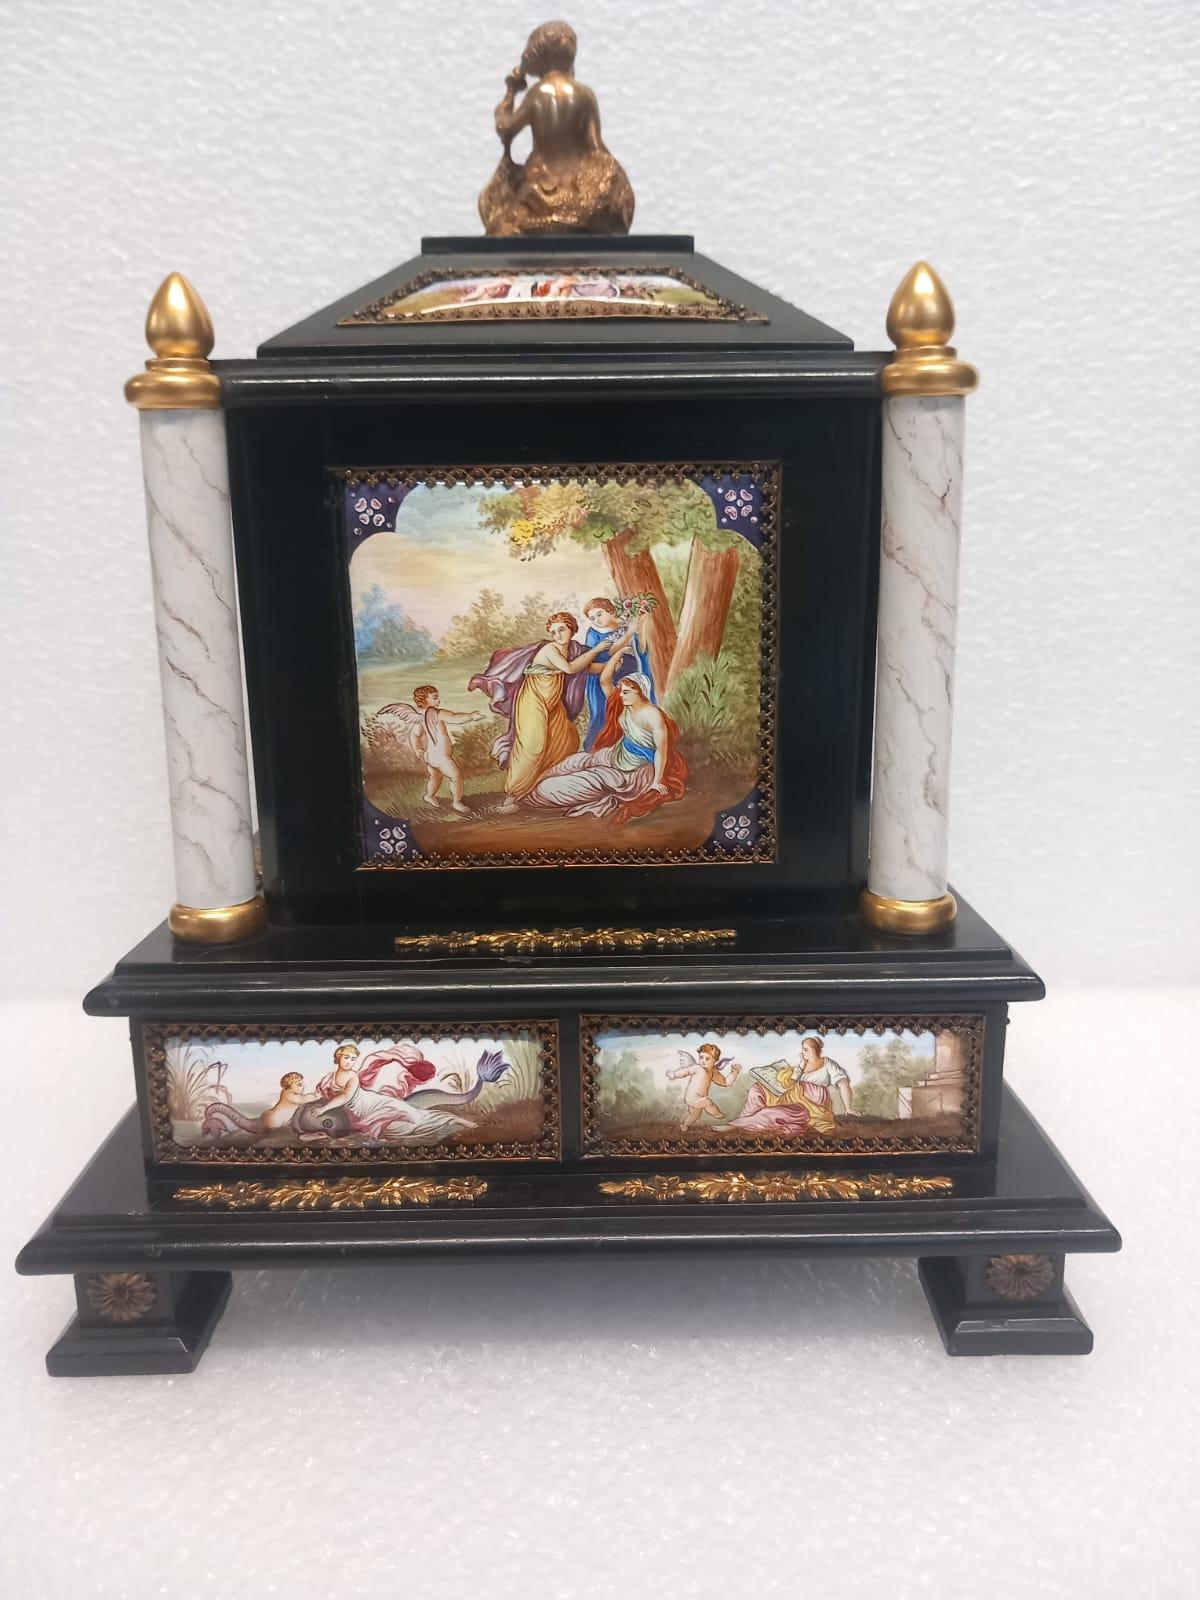 A wonderful Viennese enamel cabinet , in black ebony with gilded ormolu elements and enamel cartouches,made in the Renaissance style , circa 1860.
The front of the cabinet is decorated with two enamel plaques of dancing ladies in Roman dresses ,